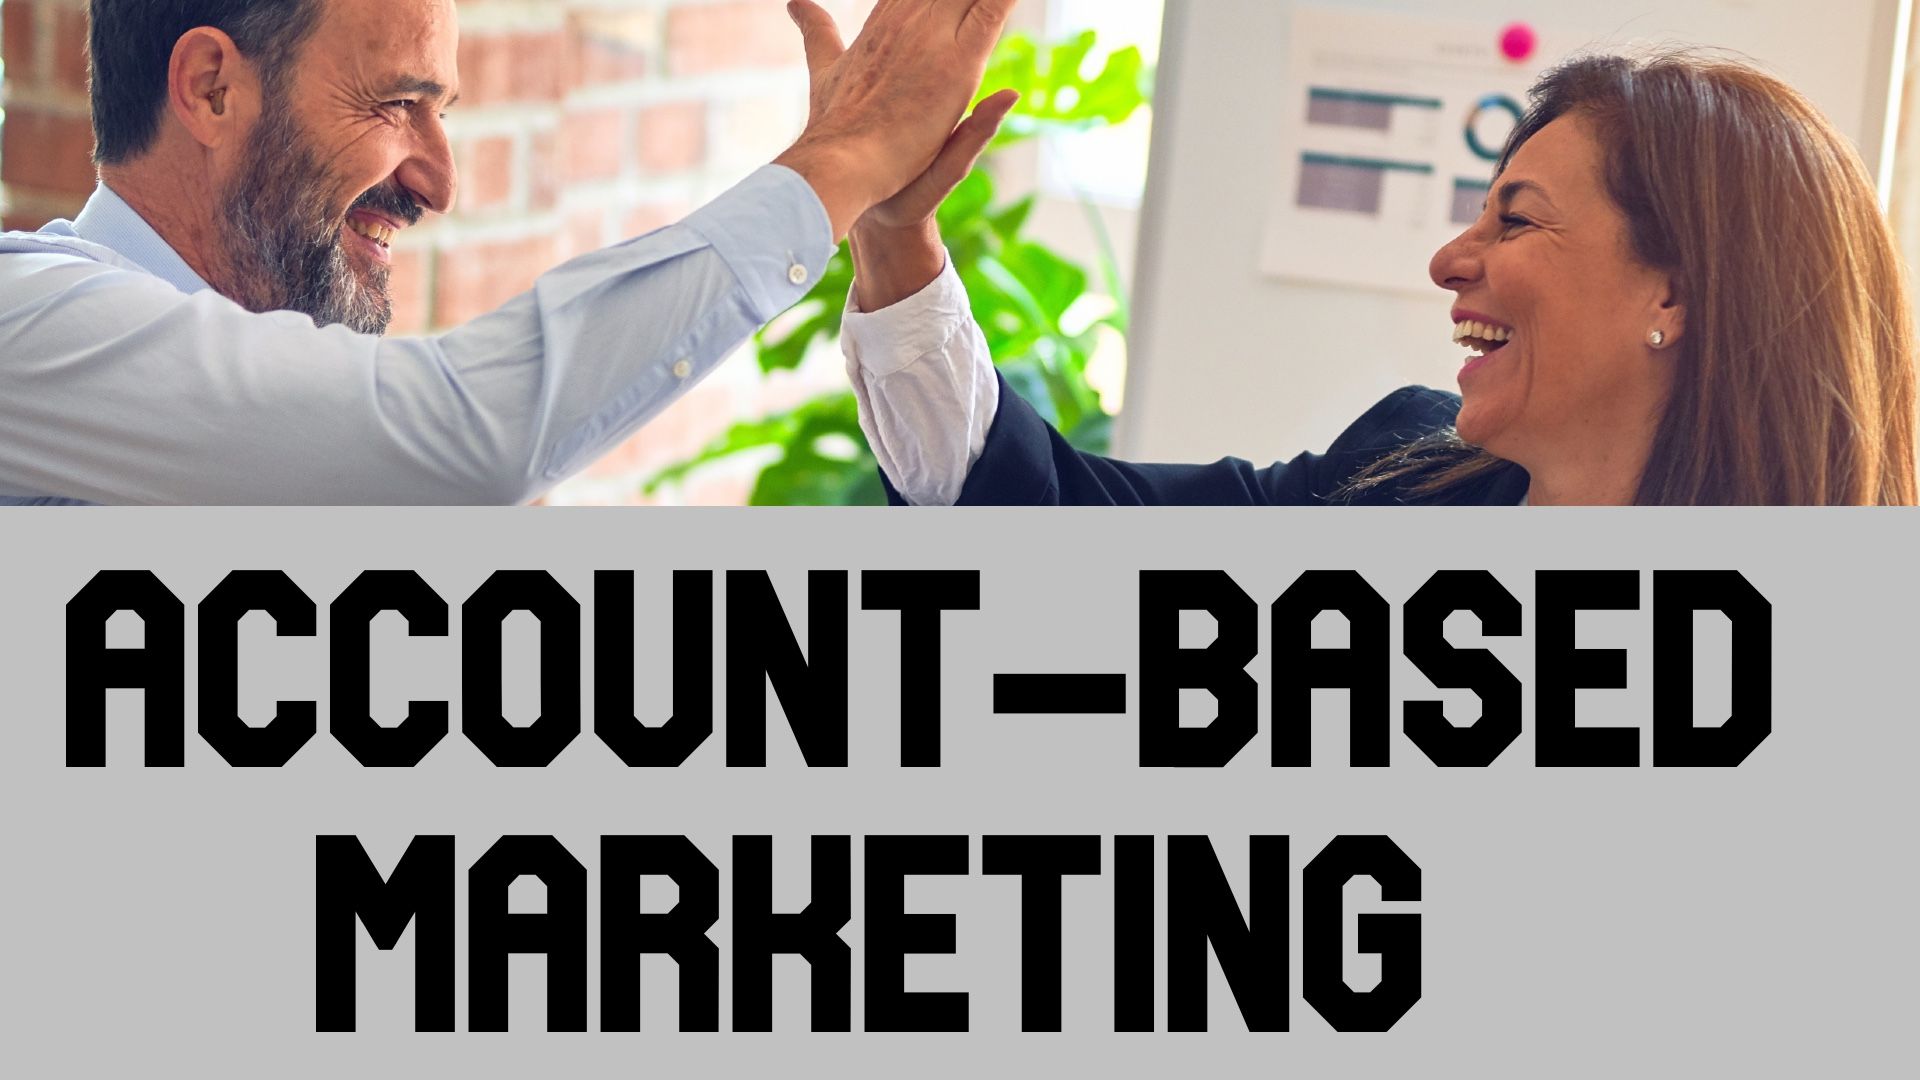 What is Account-Based Marketing (ABM)?